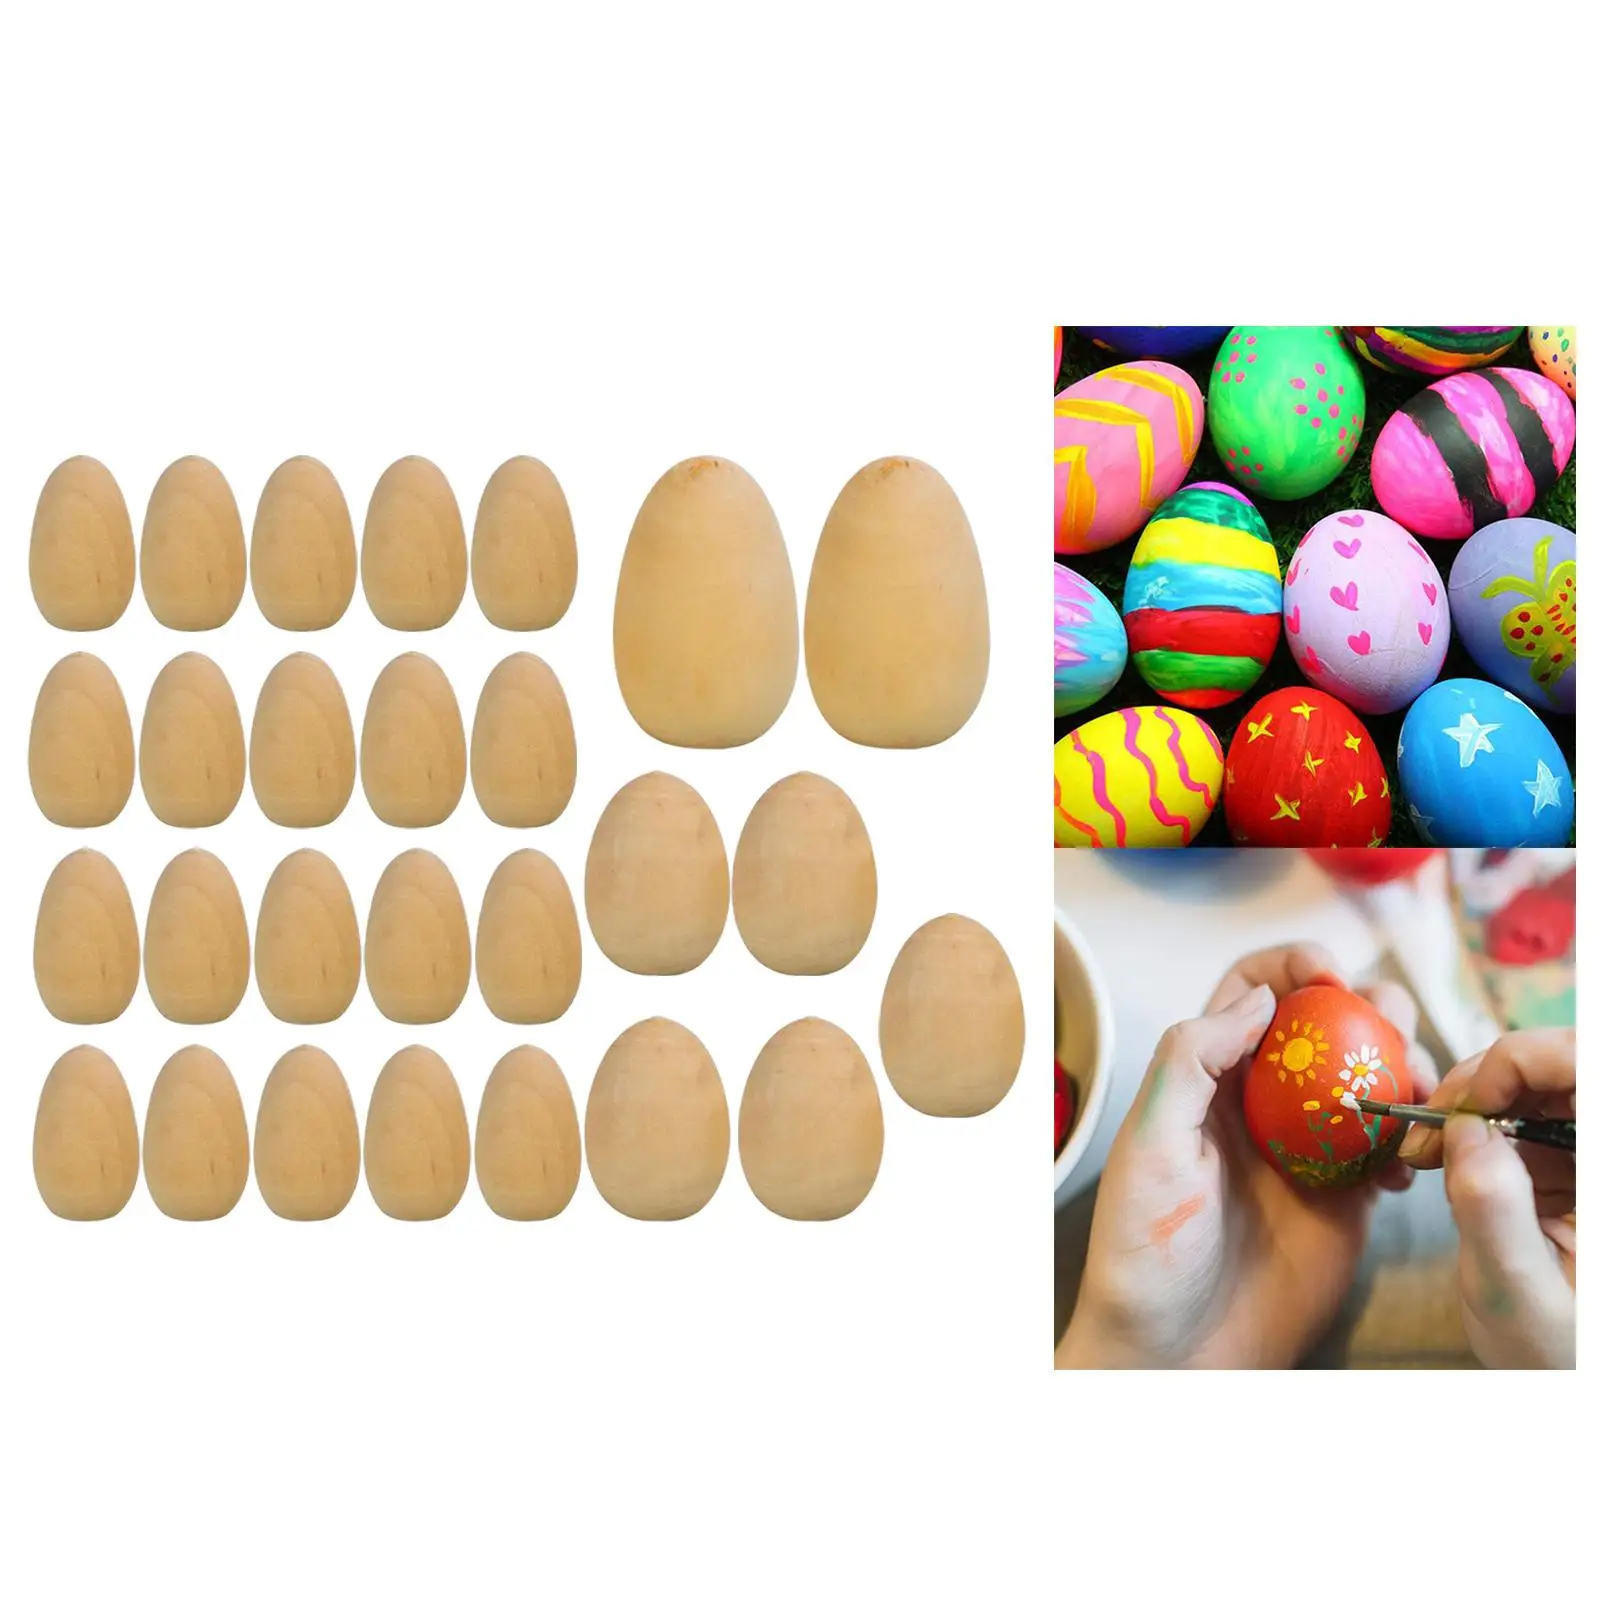 27x Wooden Blank Eggs Fake Eggs Painted Exercise Unfinished Wood Eggs with Flat Bottom for DIY Crafts images - 1